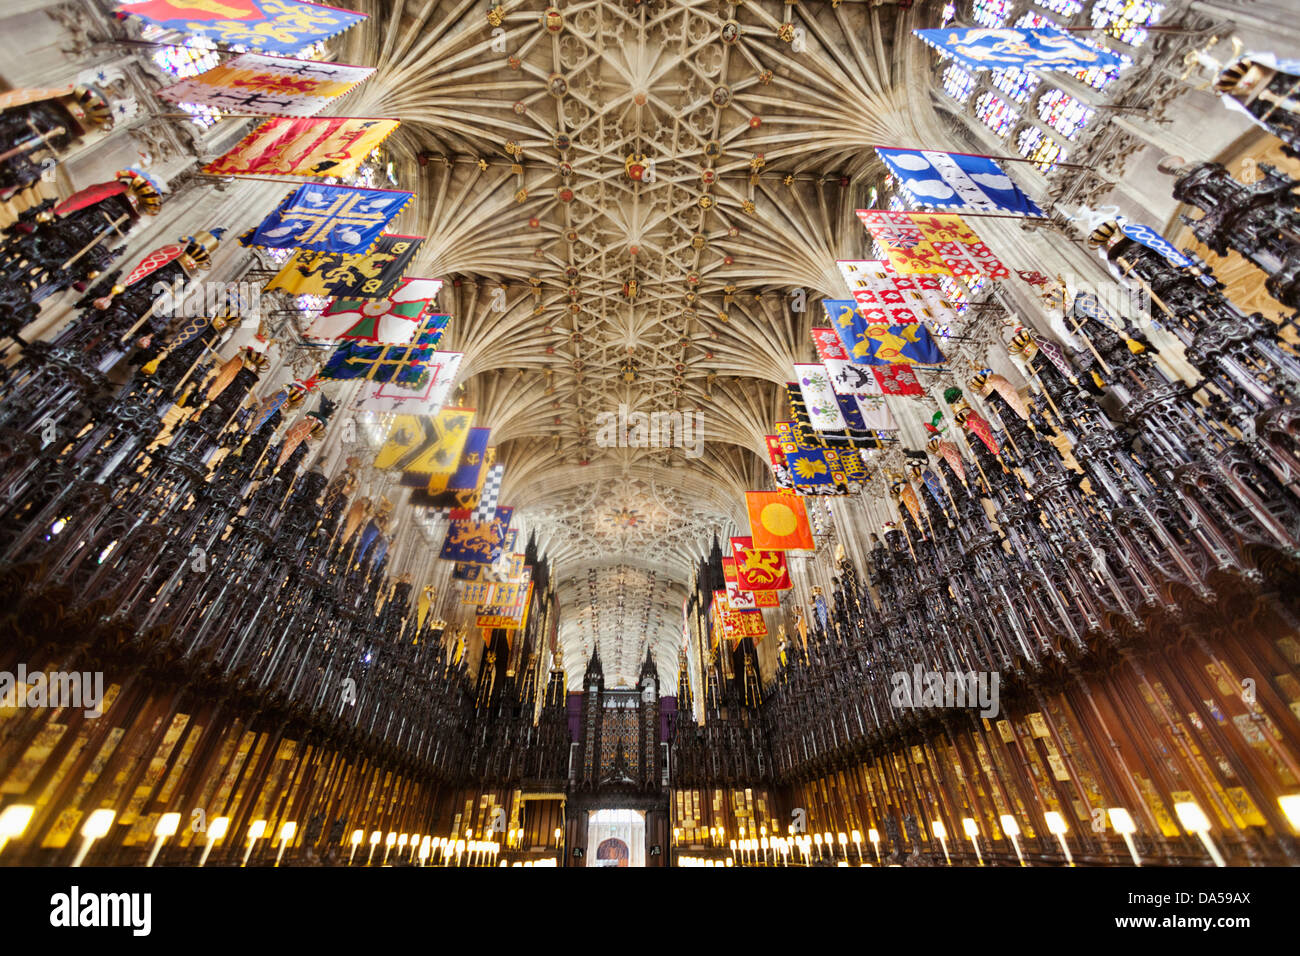 England, Berkshire, Windsor, Windsor Castle, St George's Chapel, The Quire Ceiling Stock Photo